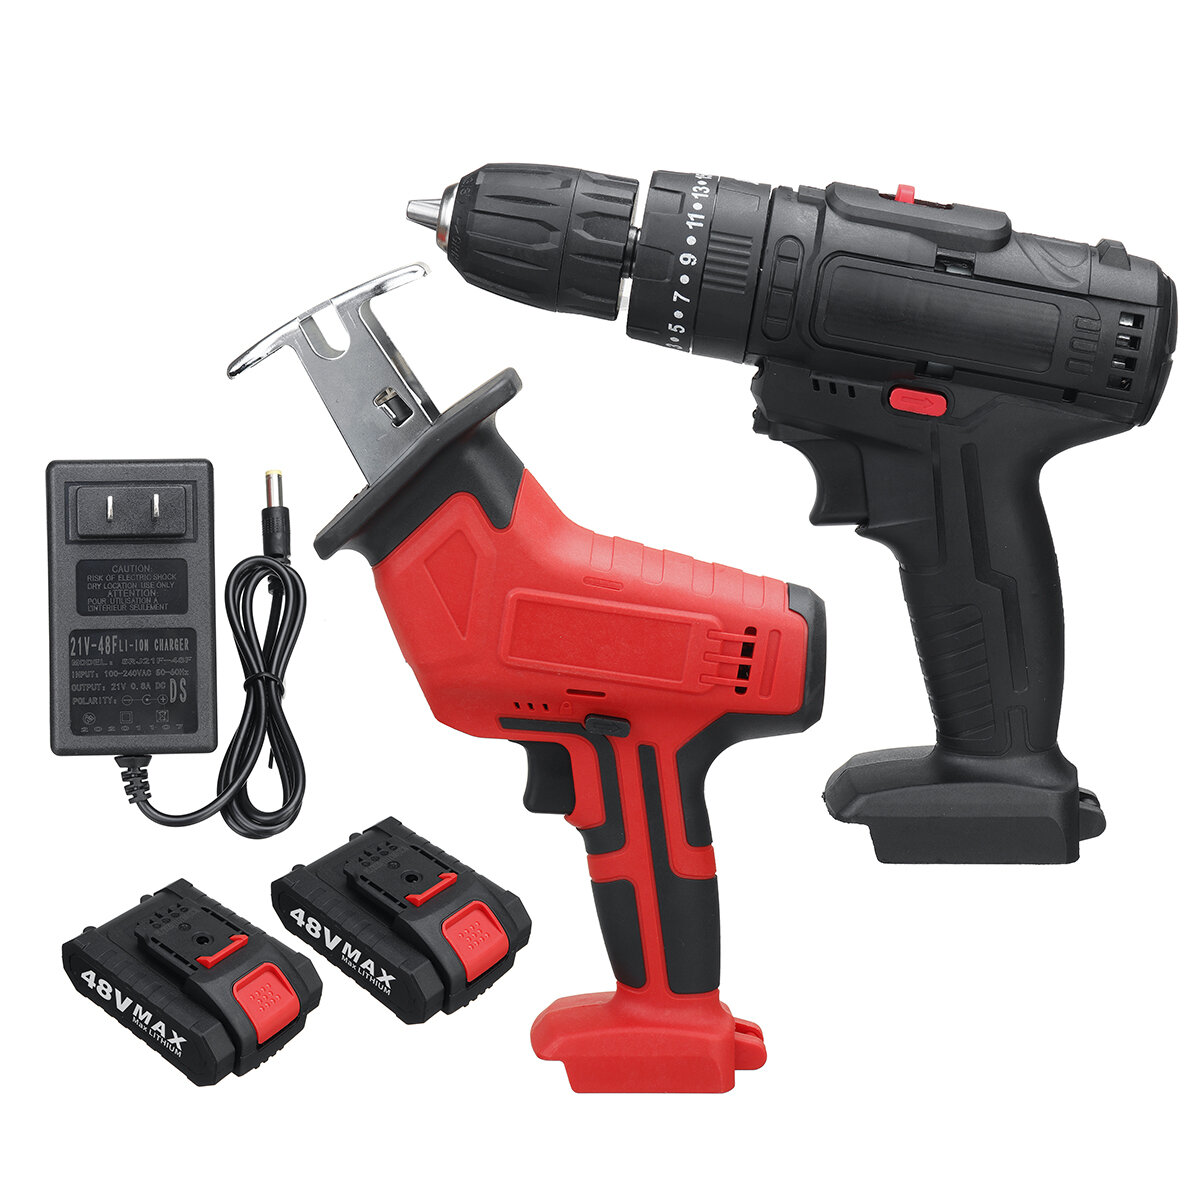 Cordless Electric Reciprocating Saw Electric Impact Drill Screwdriver Set